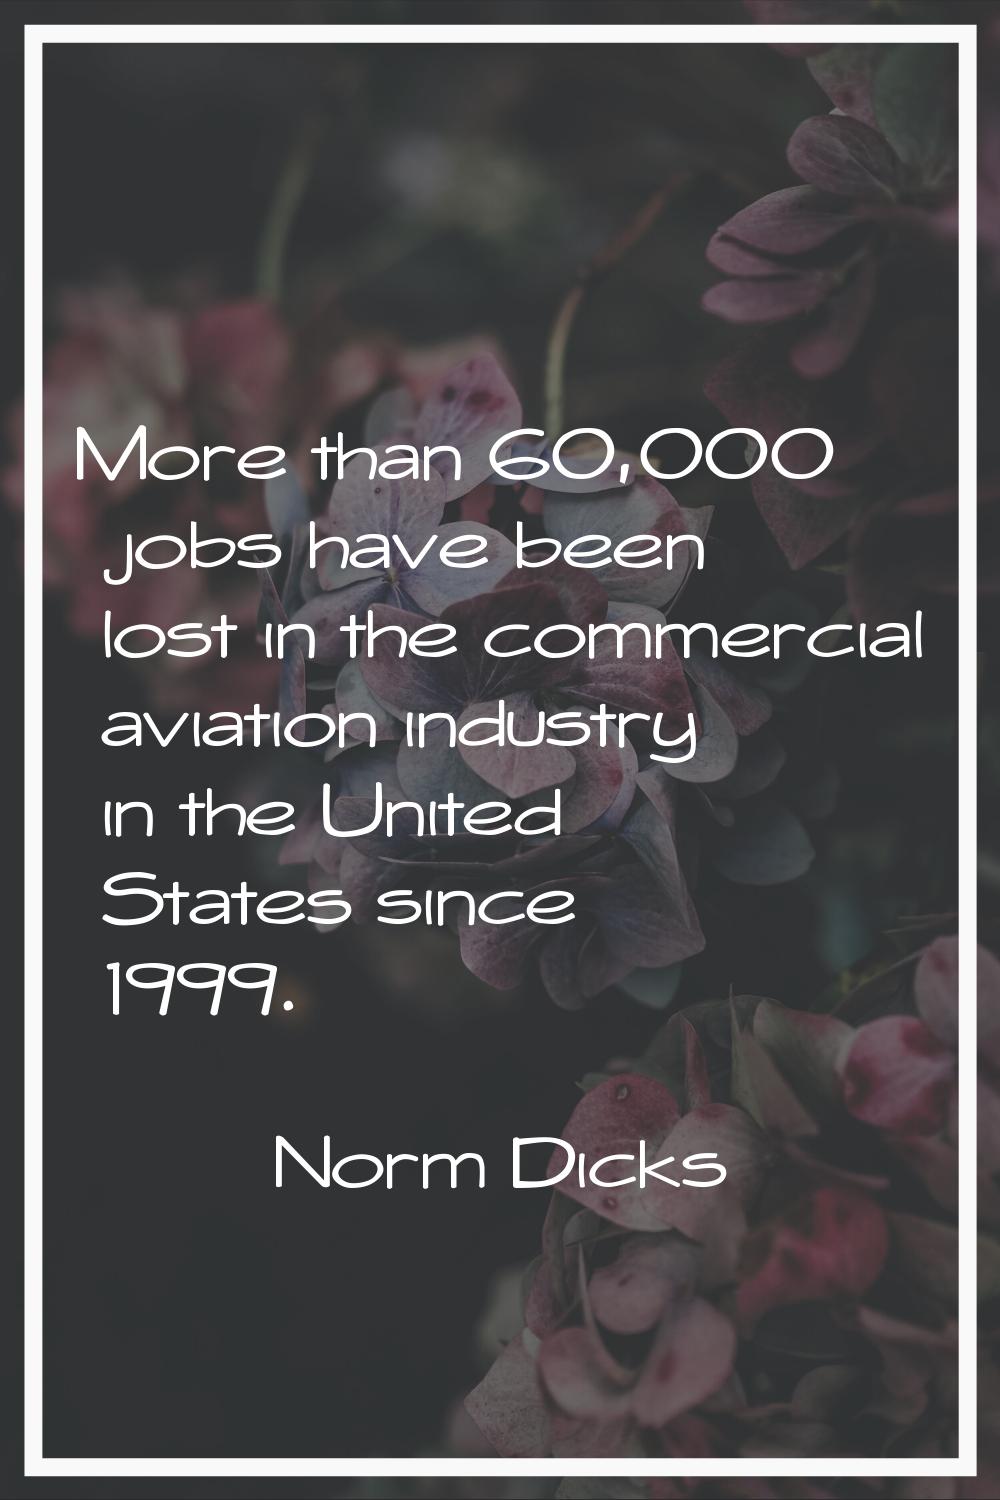 More than 60,000 jobs have been lost in the commercial aviation industry in the United States since